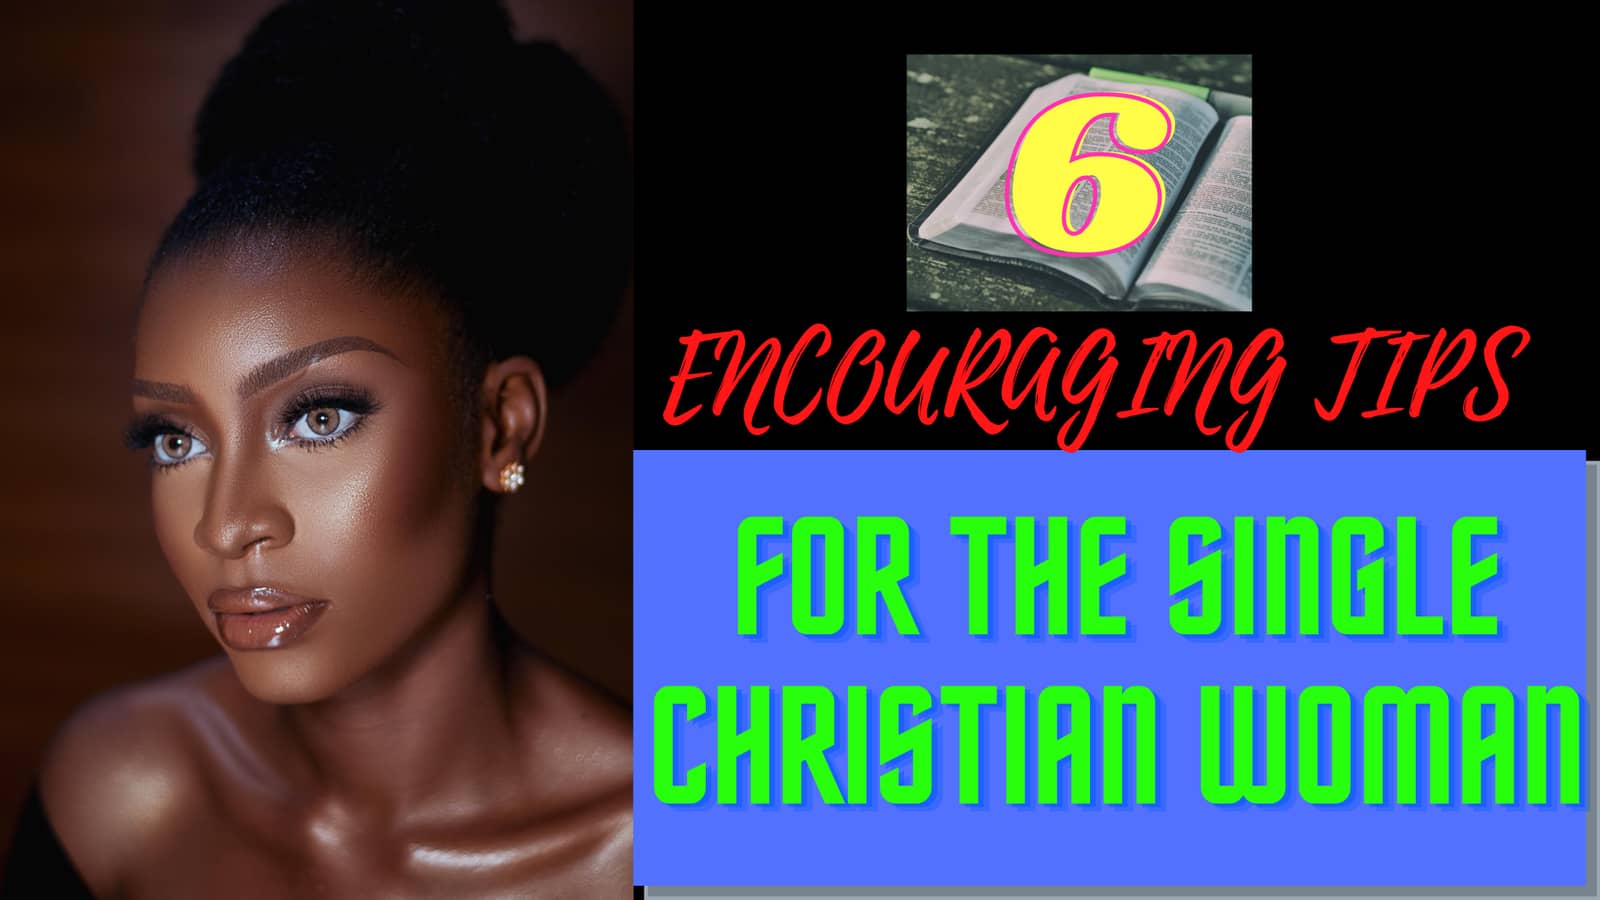 You are currently viewing SINGLE CHRISTIAN:  6 ENCOURAGING TIPS FOR  THE SINGLE CHRISTIAN WOMAN